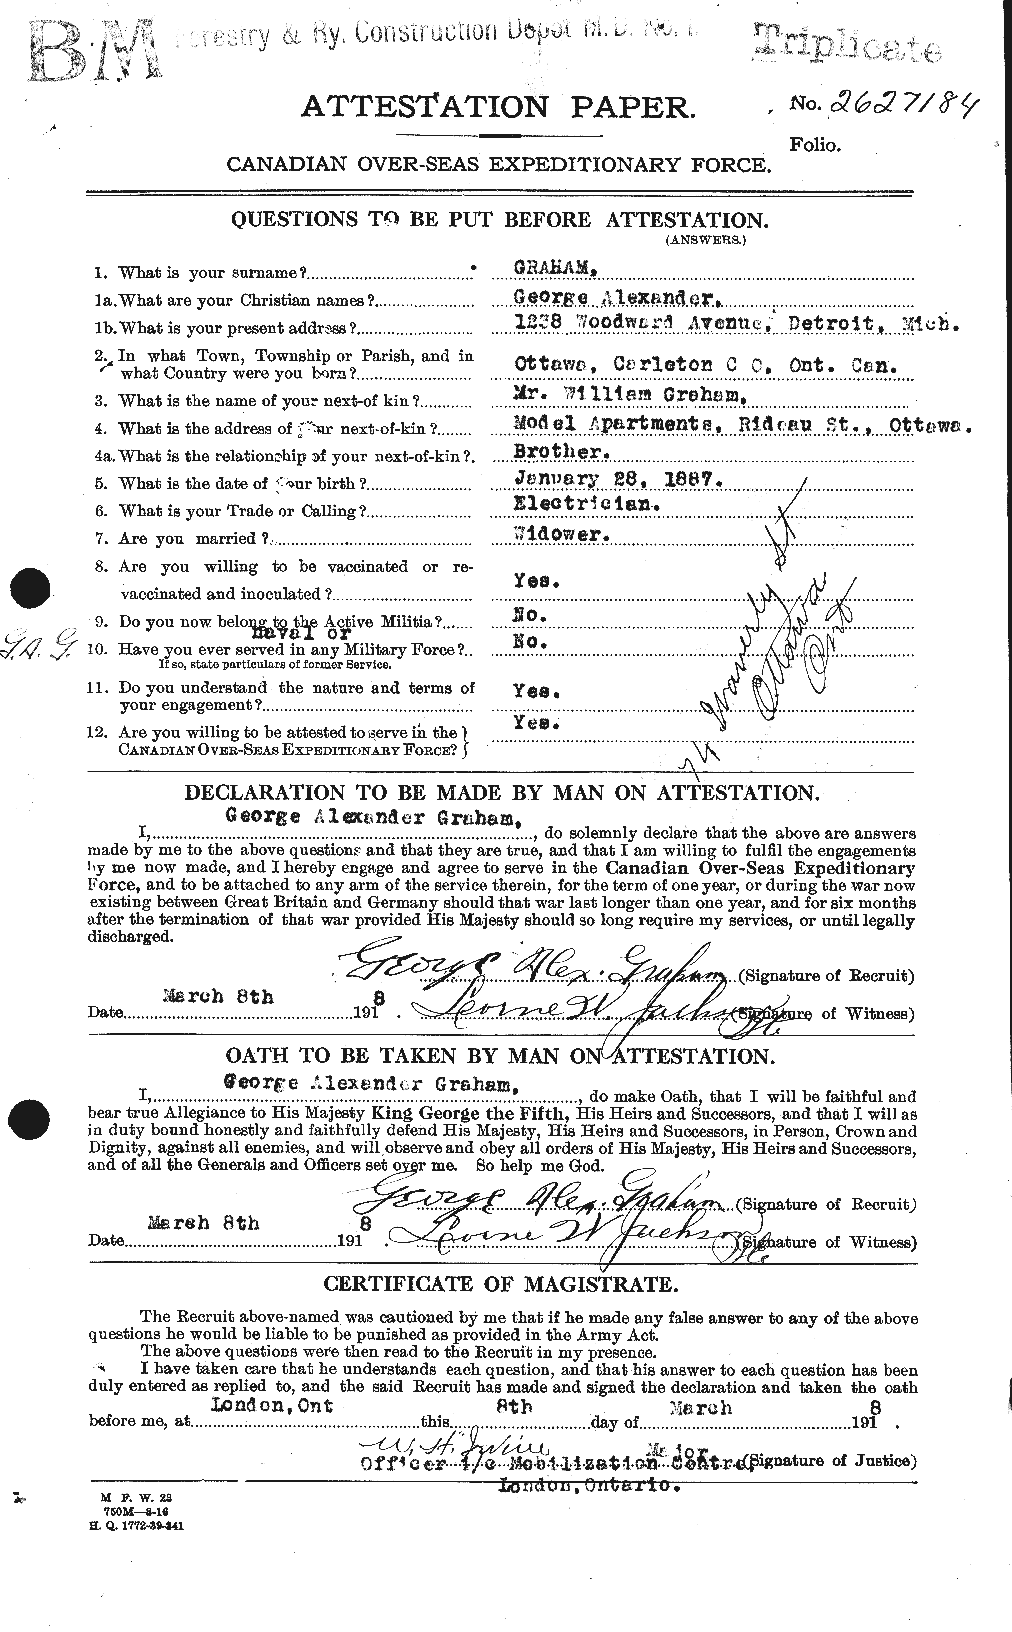 Personnel Records of the First World War - CEF 357645a